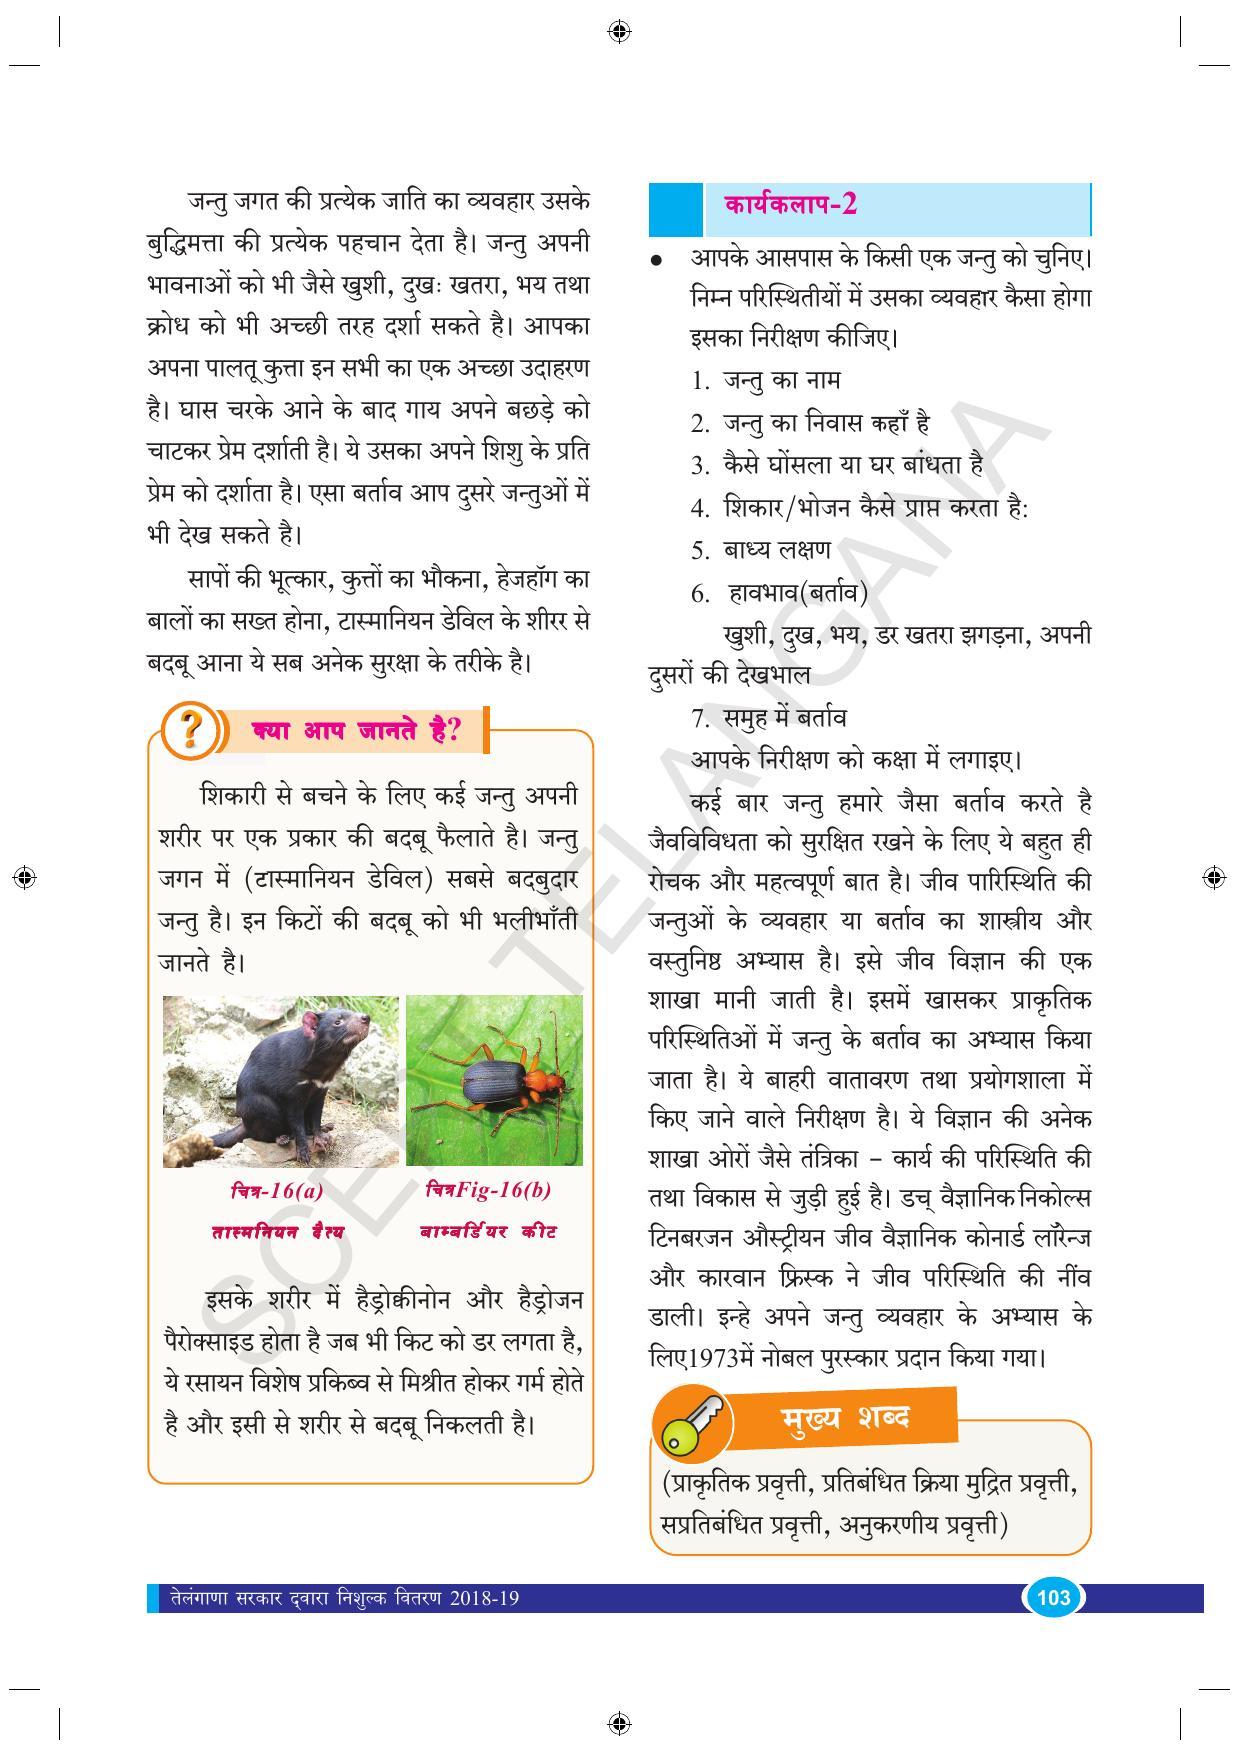 TS SCERT Class 9 Biological Science (Hindi Medium) Text Book - Page 115